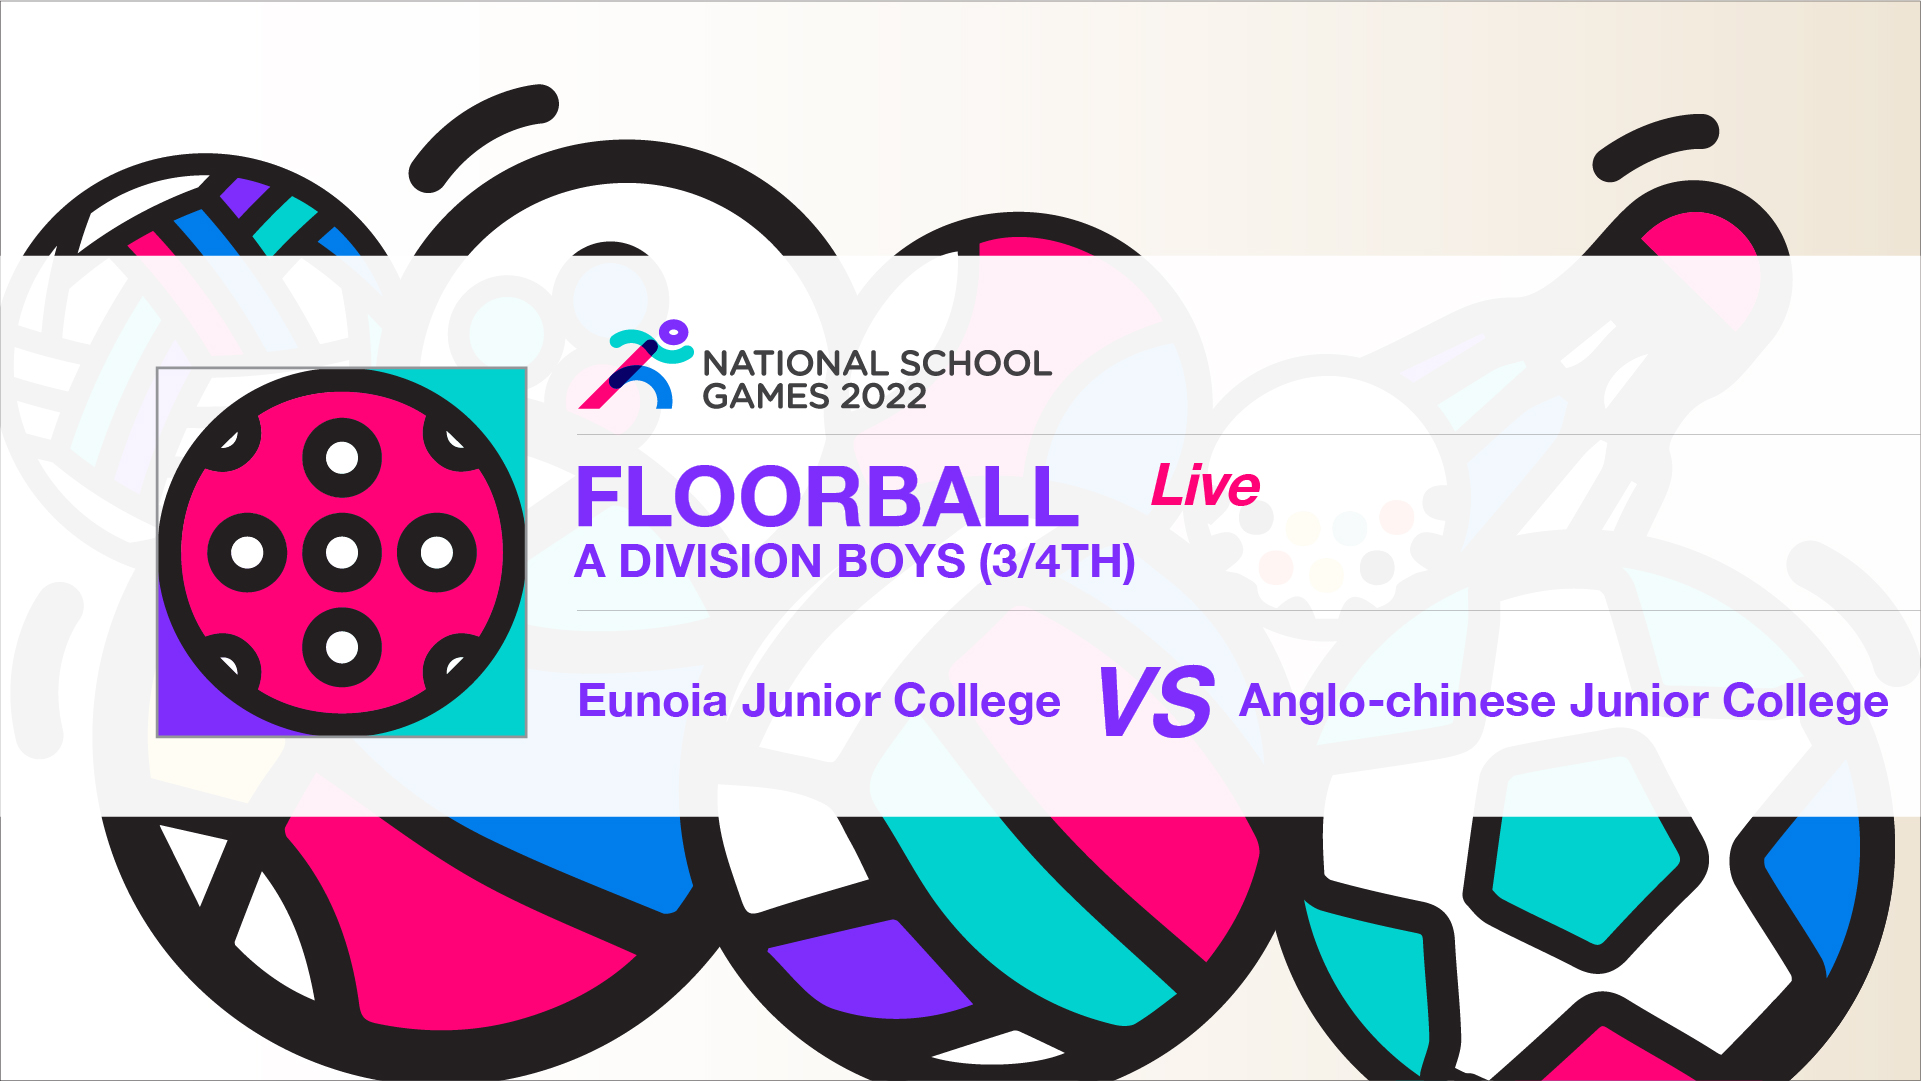 SSSC Floorball A Division Boys 3rd/4th | Eunoia Junior College vs Anglo-Chinese Junior College